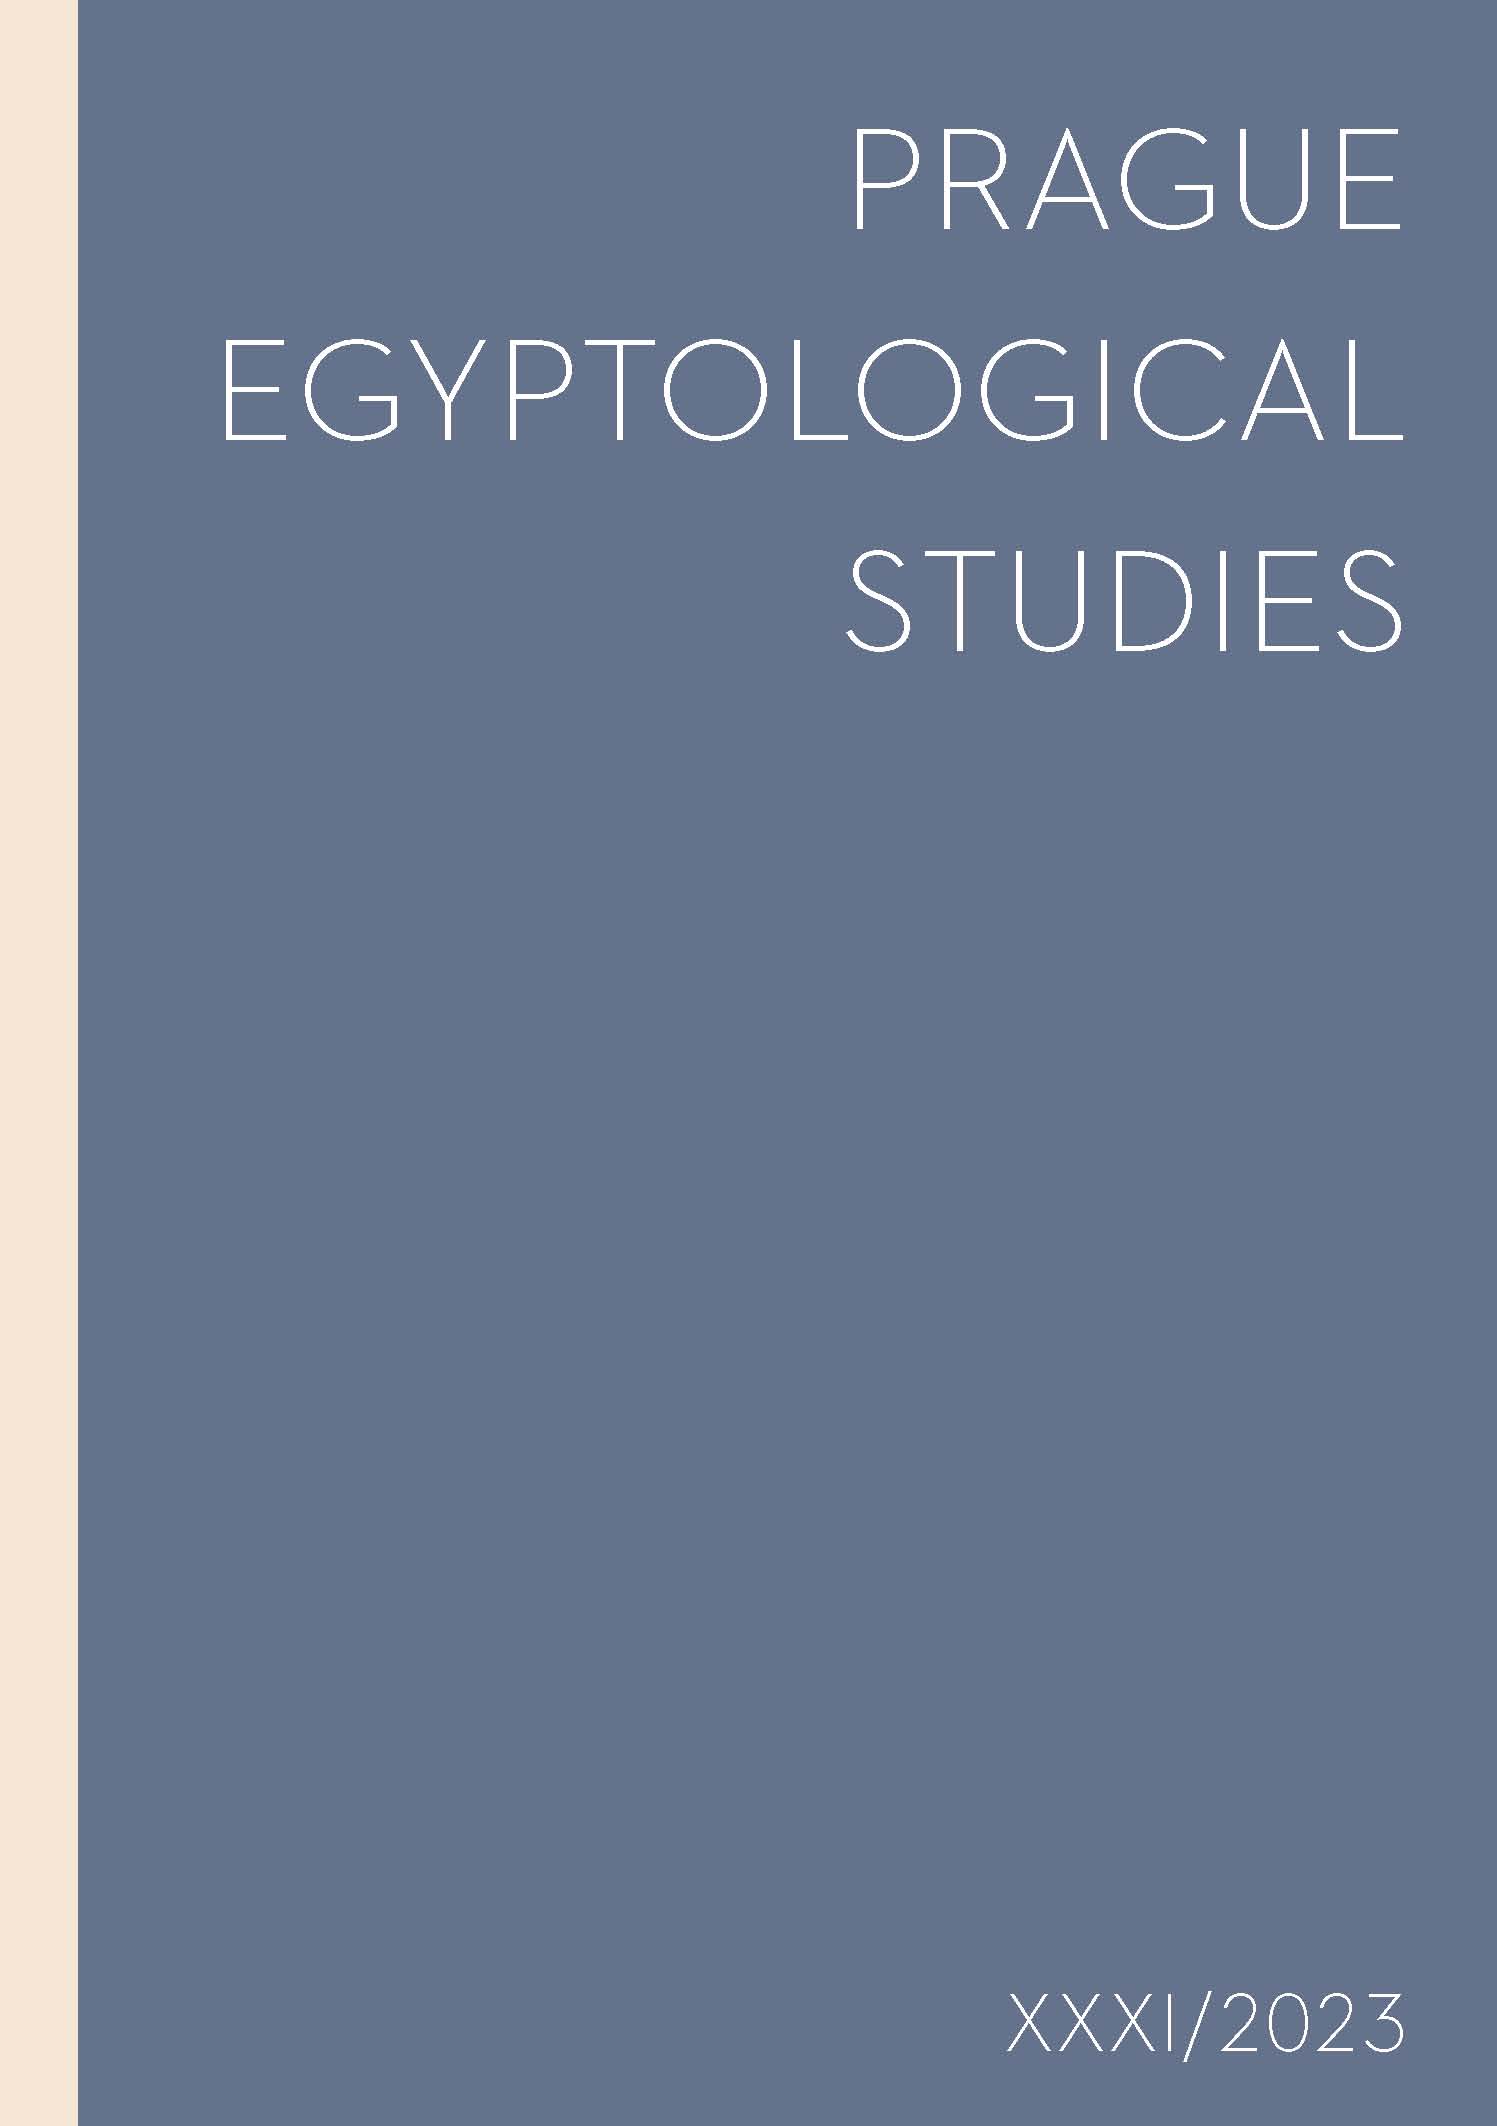 The linguistic metaphors of deafness in Egyptian literary, biographical and medical texts